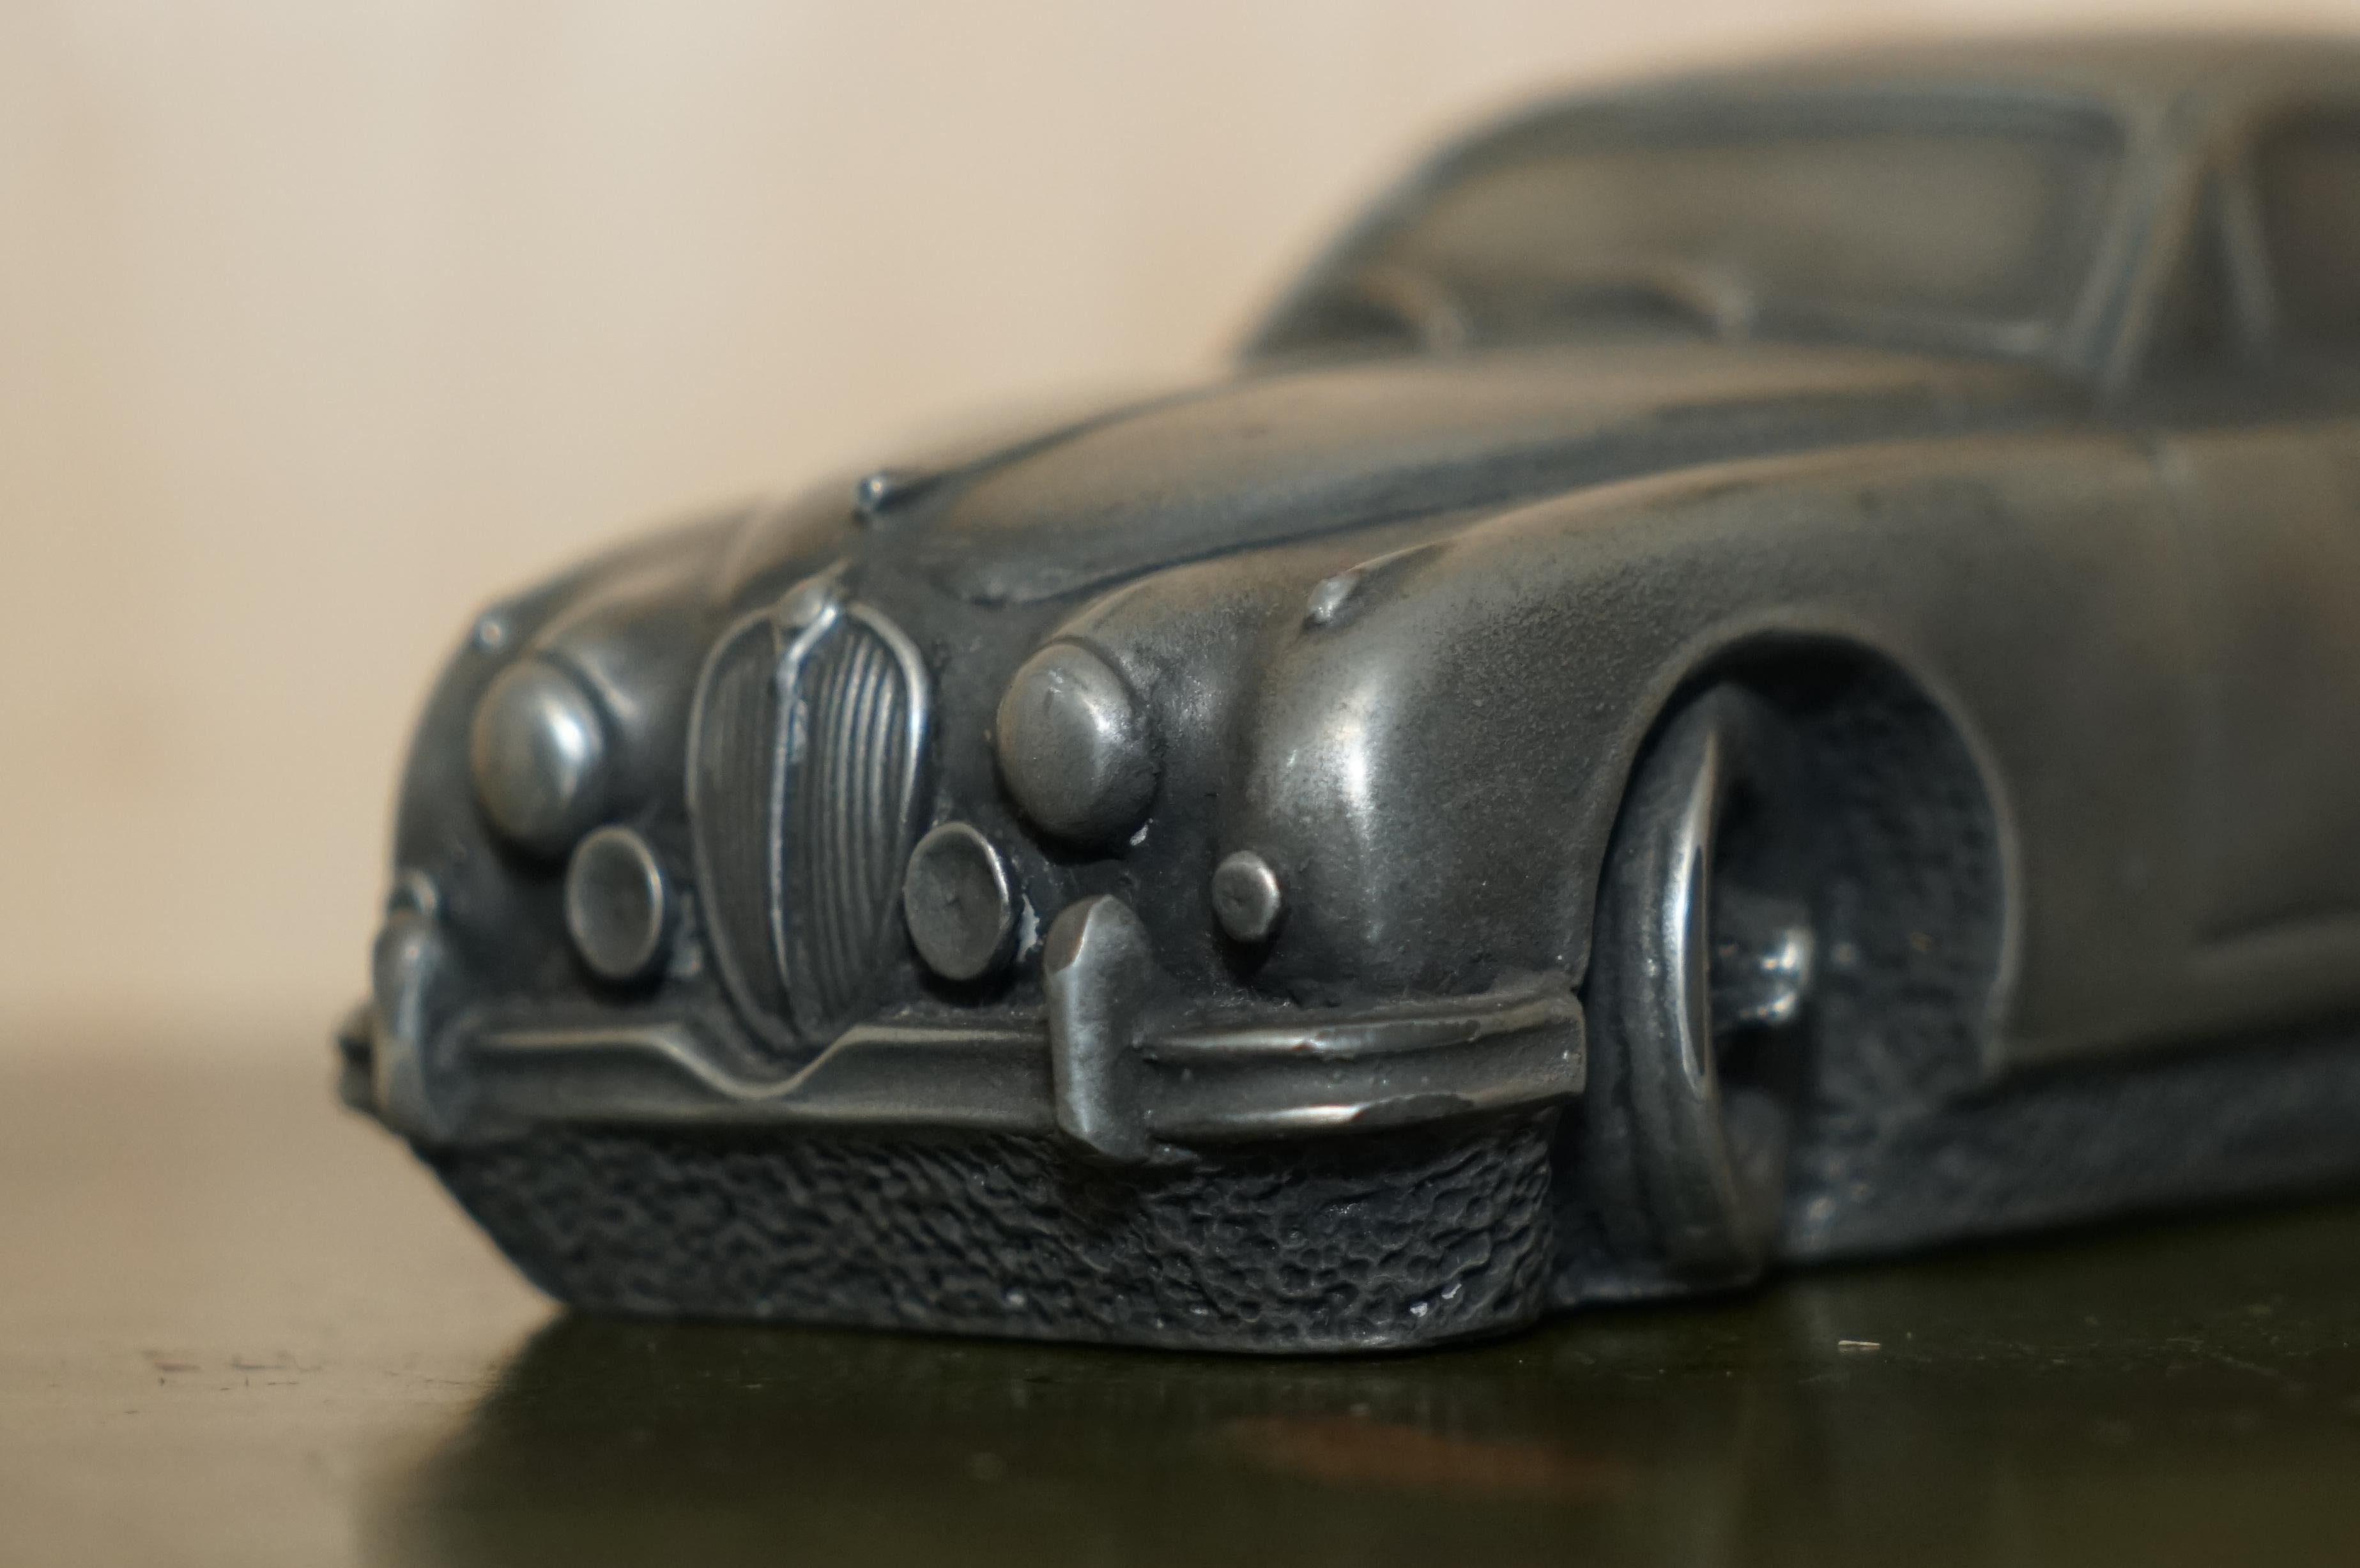 (a) Gallery Pewter Jaguar 1955-1959 Edition Mark i Car Must See Pictures en vente 12